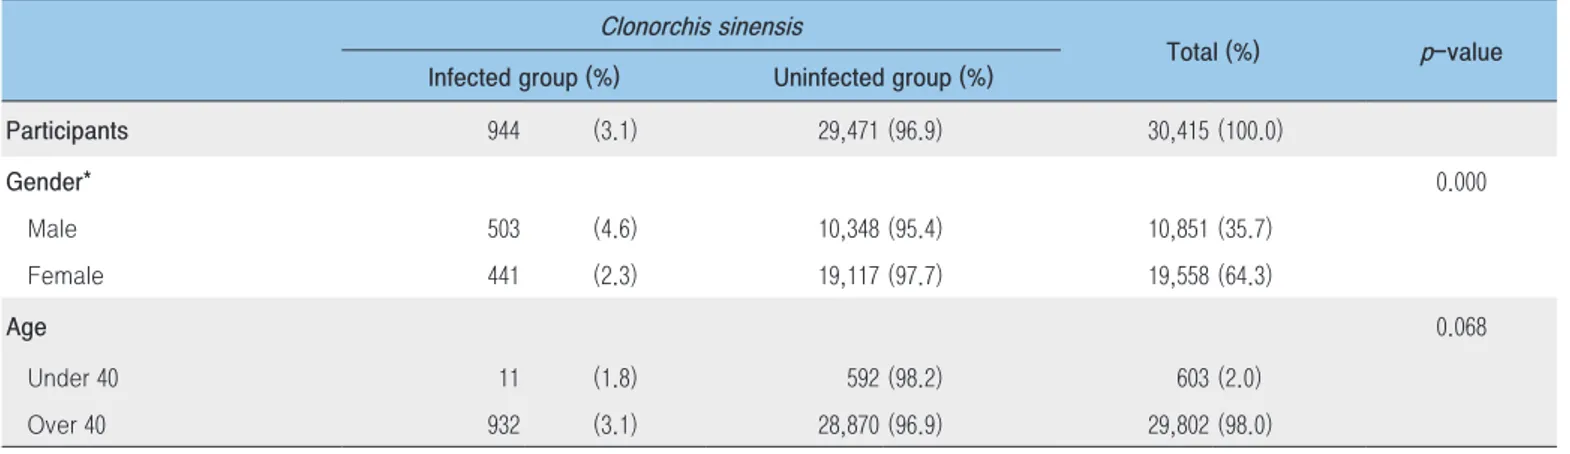 Table 2. Statistical analysis of C. sinensis infected and uninfected group by gender and age Clonorchis sinensis